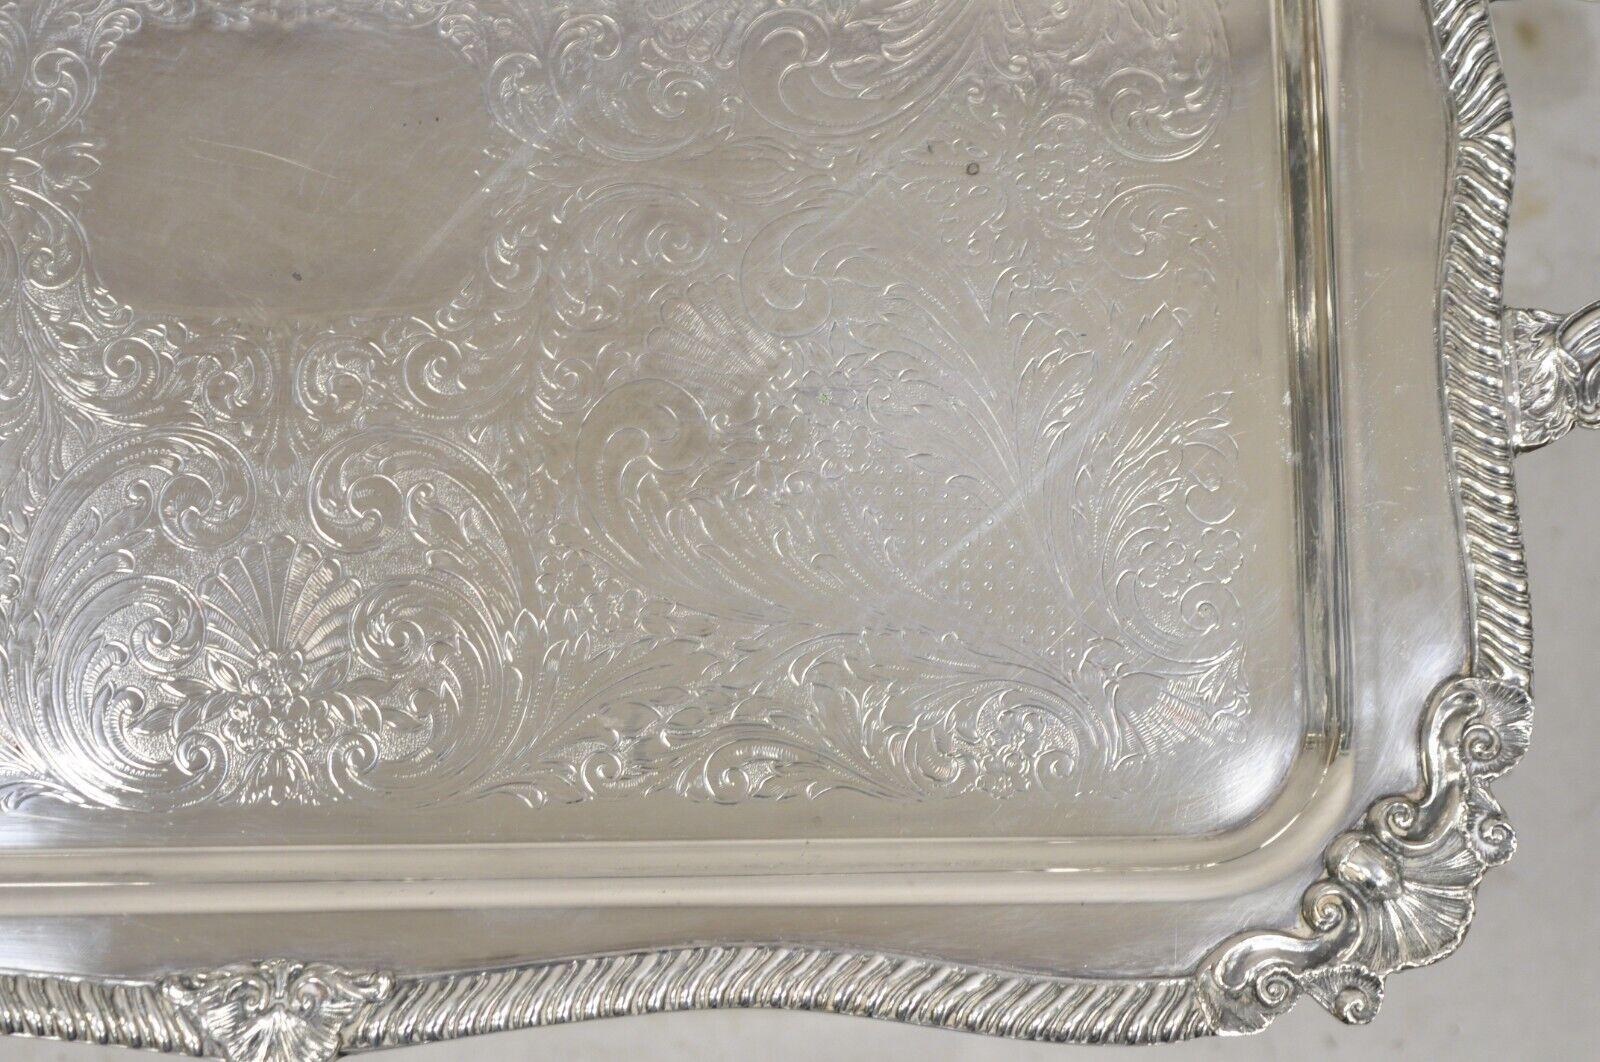 Sheridan Large Ornate Silver Plated English Victorian Style Serving Platter Tray 8